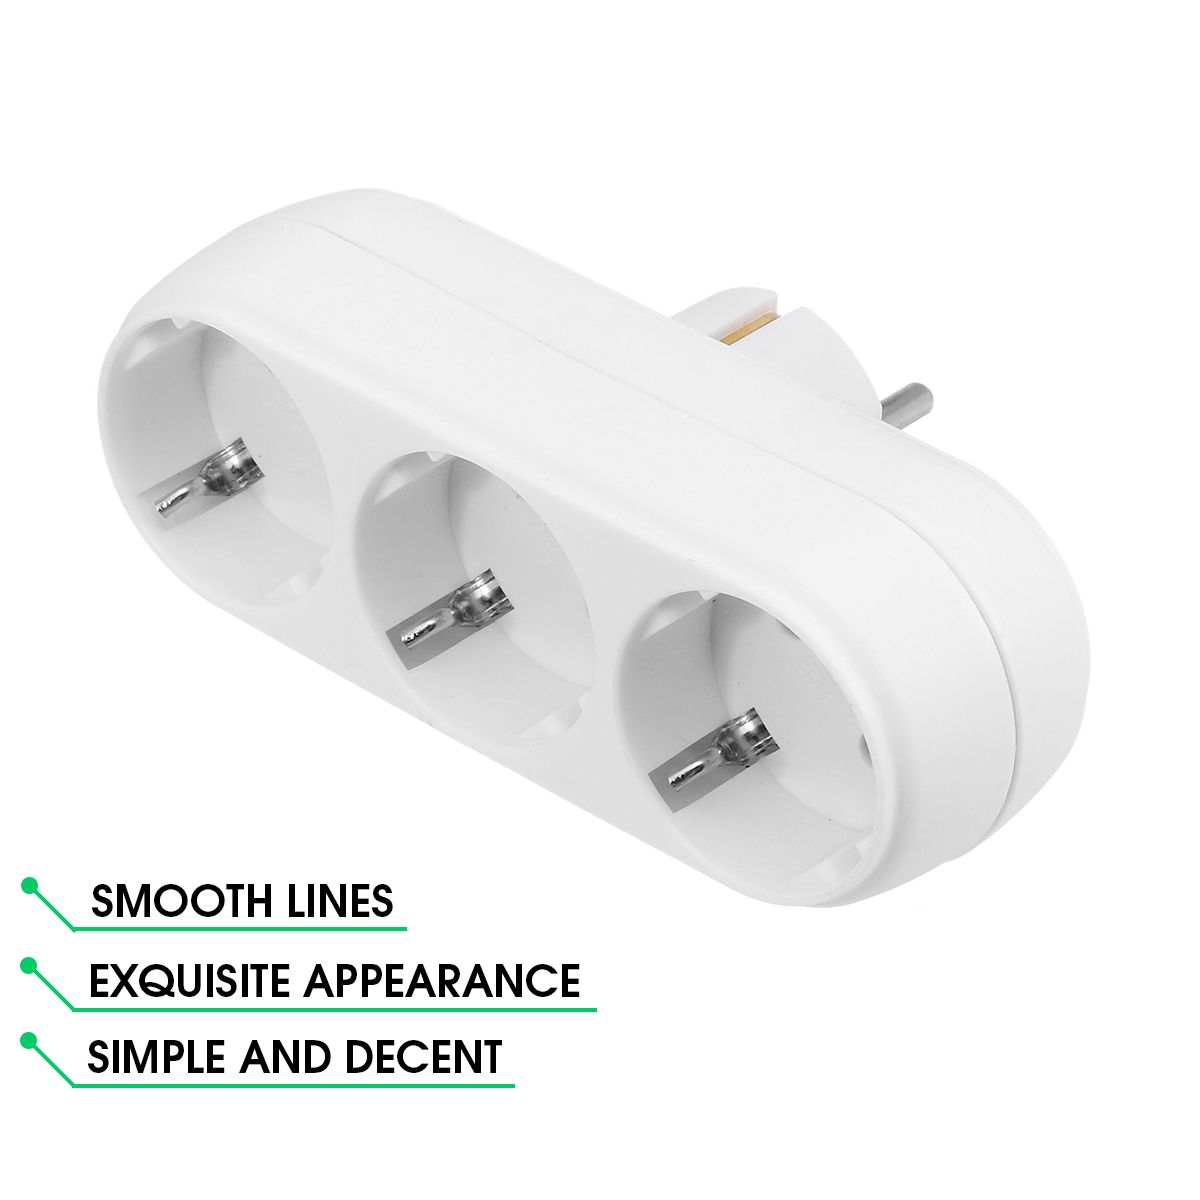 3500W-250V-16A-EU-Plug-Socket-With-3-Outlets-Travel-Adapter-Power-Strip-Extension-Smart-USB-Charger-1342937